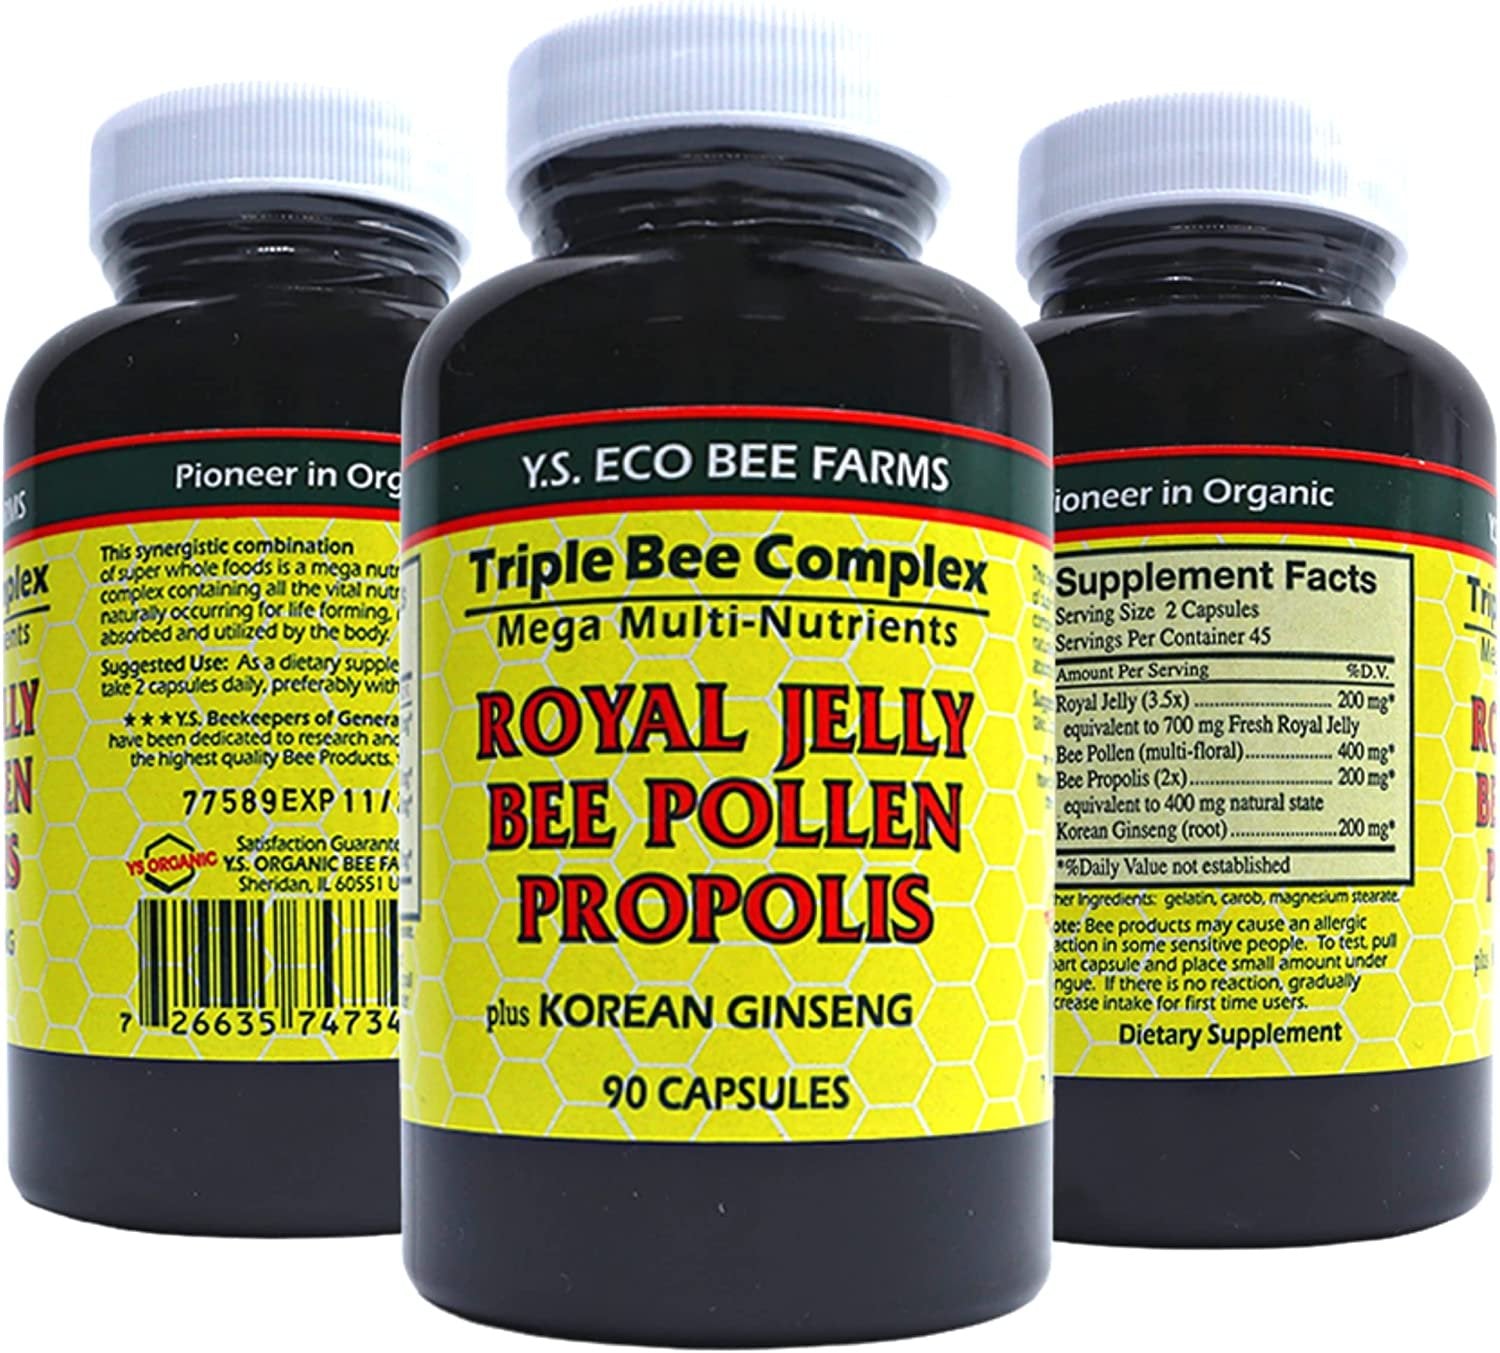 Y.S. Eco Bee Farms Triple Bee Complex Royal Jelly Bee Pollen Propolis Plus Korean Ginseng - Health and Wellness Organic Bee Pollen Supplement - 90 Ct with Worldwide Nutrition Multi Purpose Key Chain